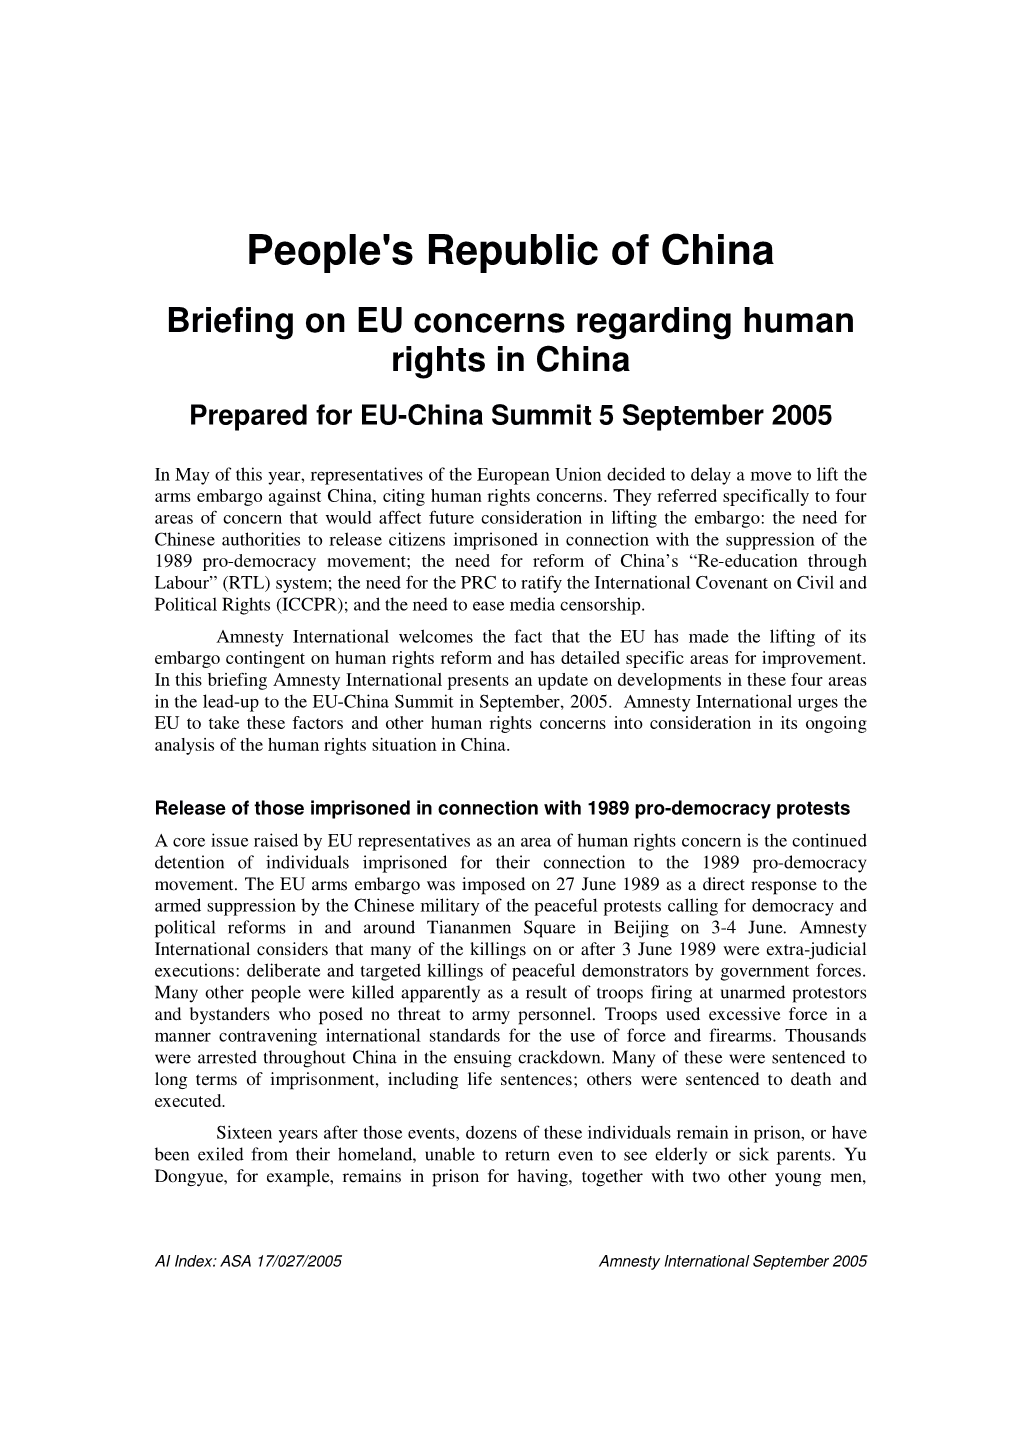 People's Republic of China Briefing on EU Concerns Regarding Human Rights in China Prepared for EU-China Summit 5 September 2005